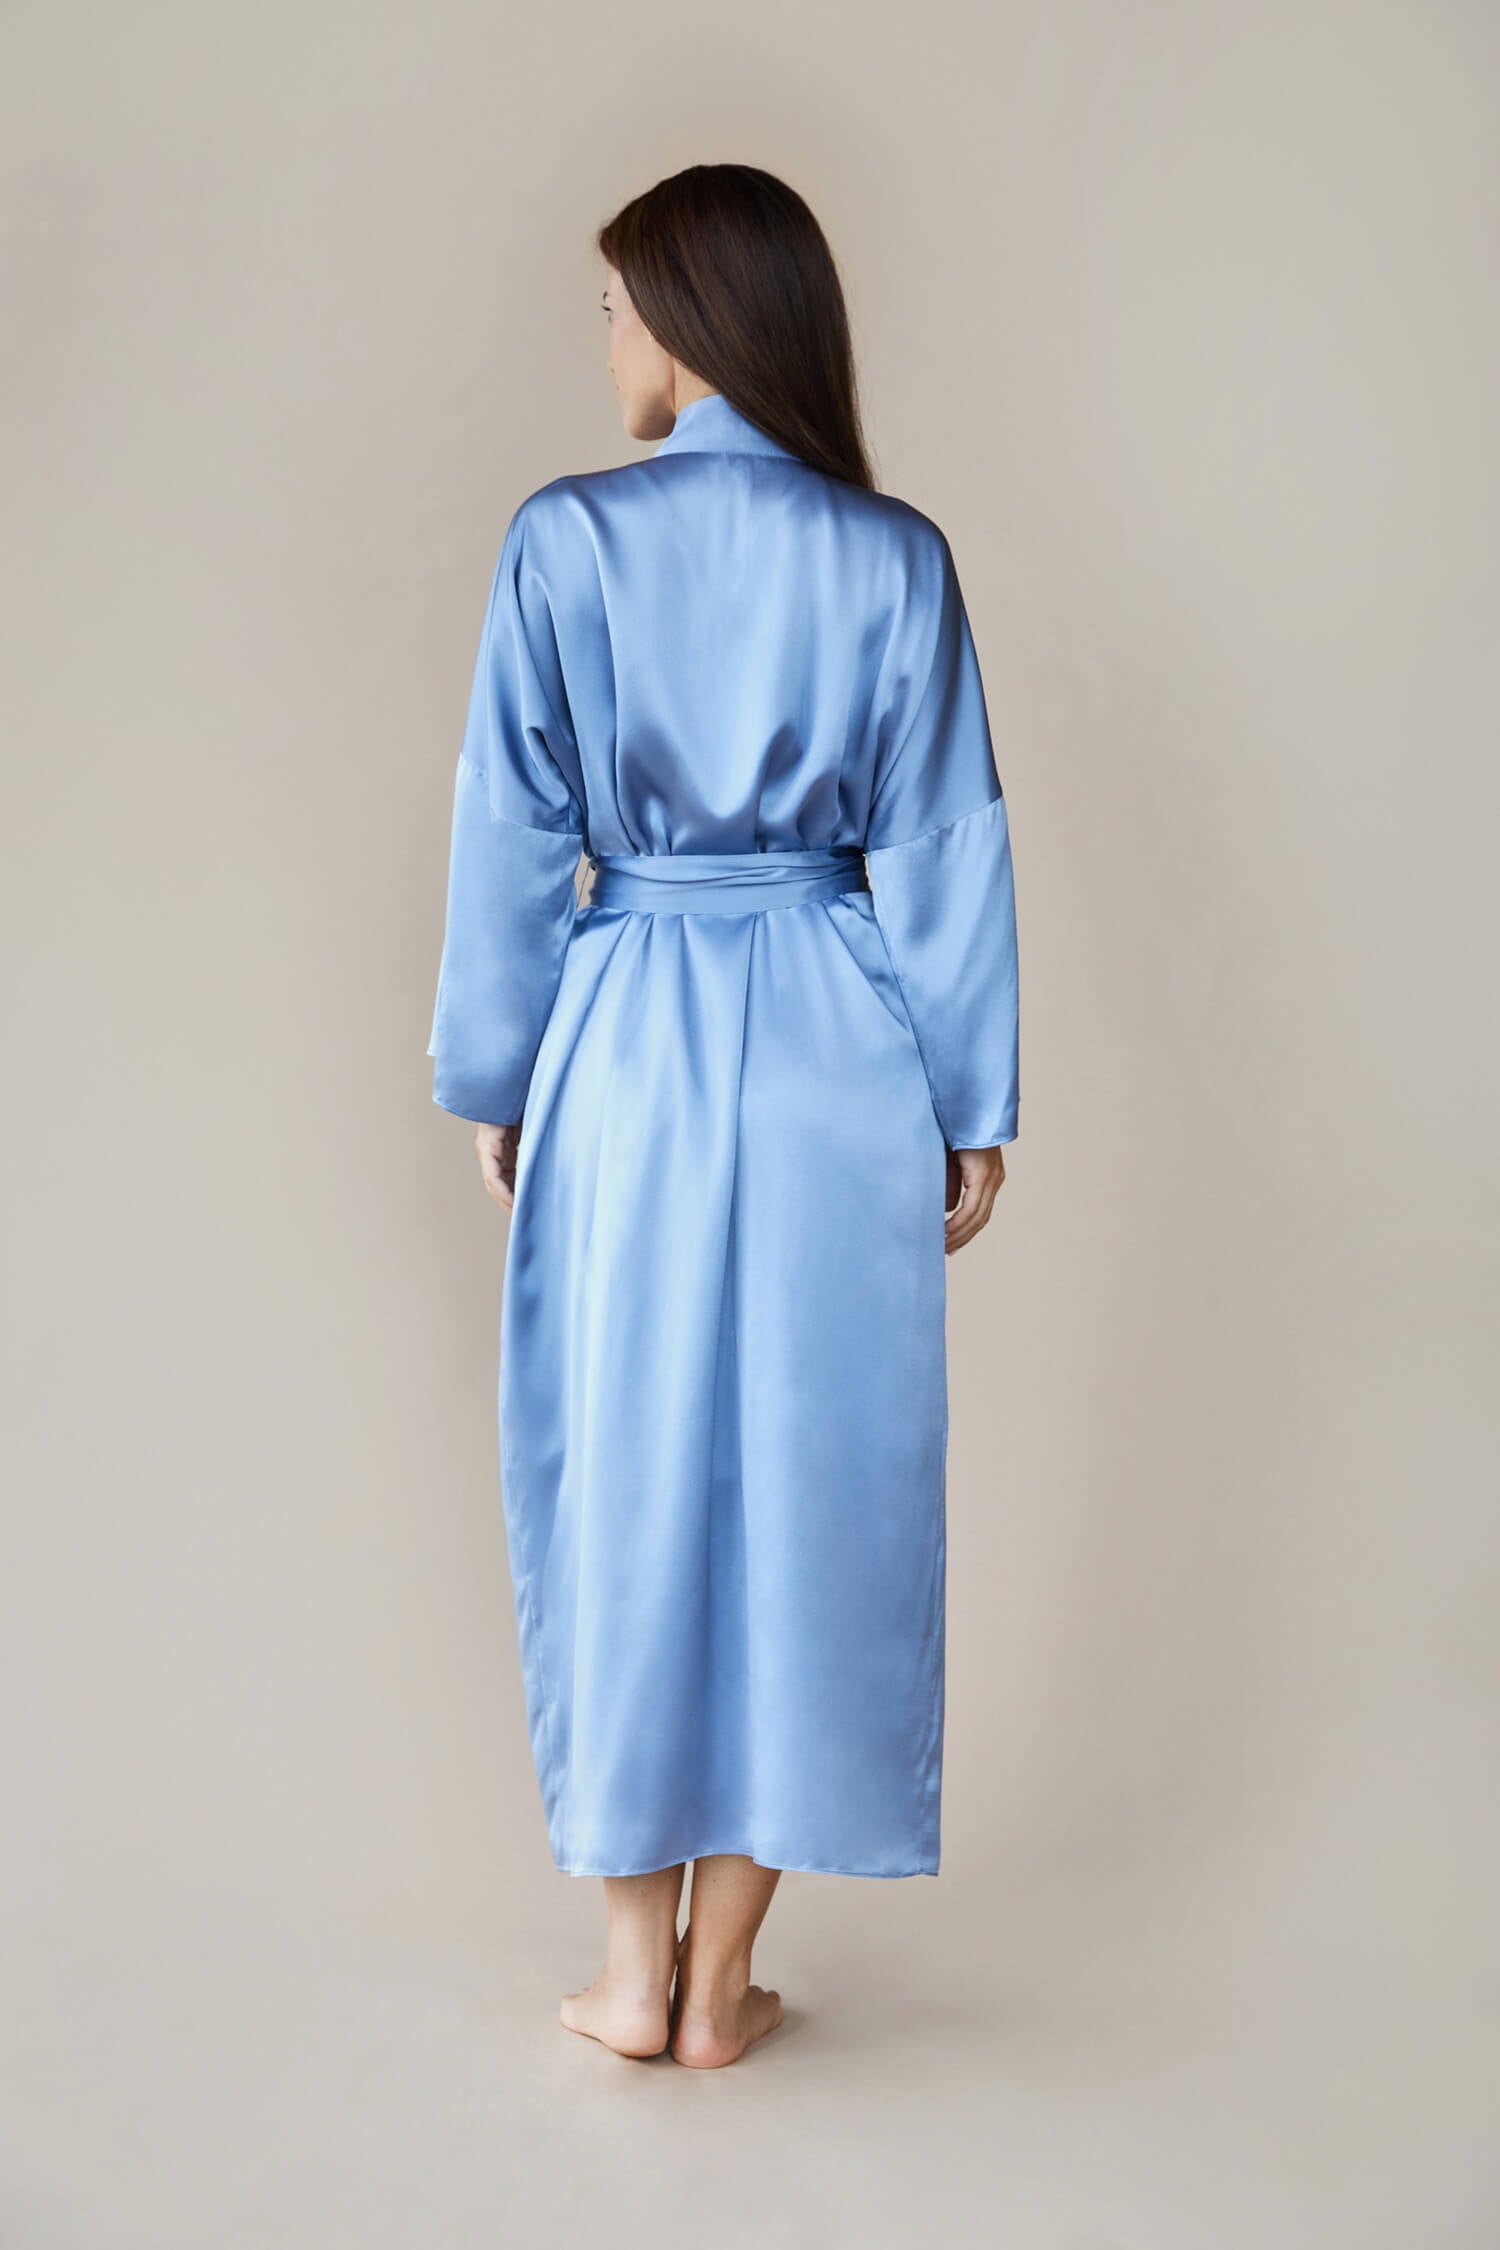 Model shot from the back wearing a kimono style luxury silk robe In blue tied at the waist. She looks to the side with her hands by her side.